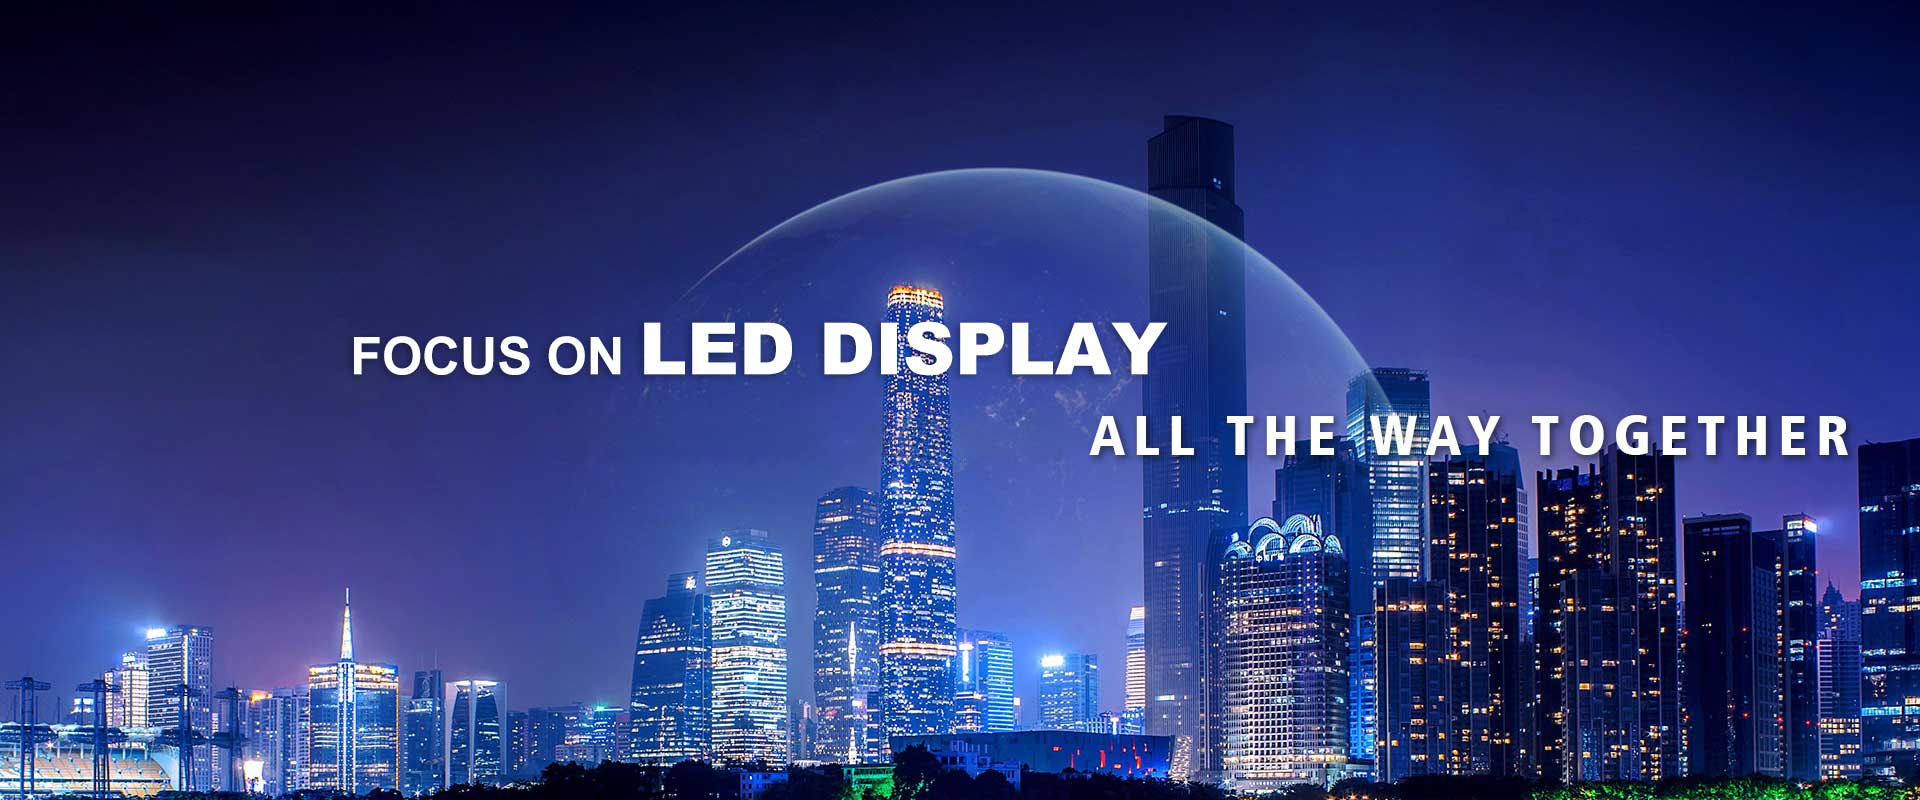 LED display manufacturers and solutions provider